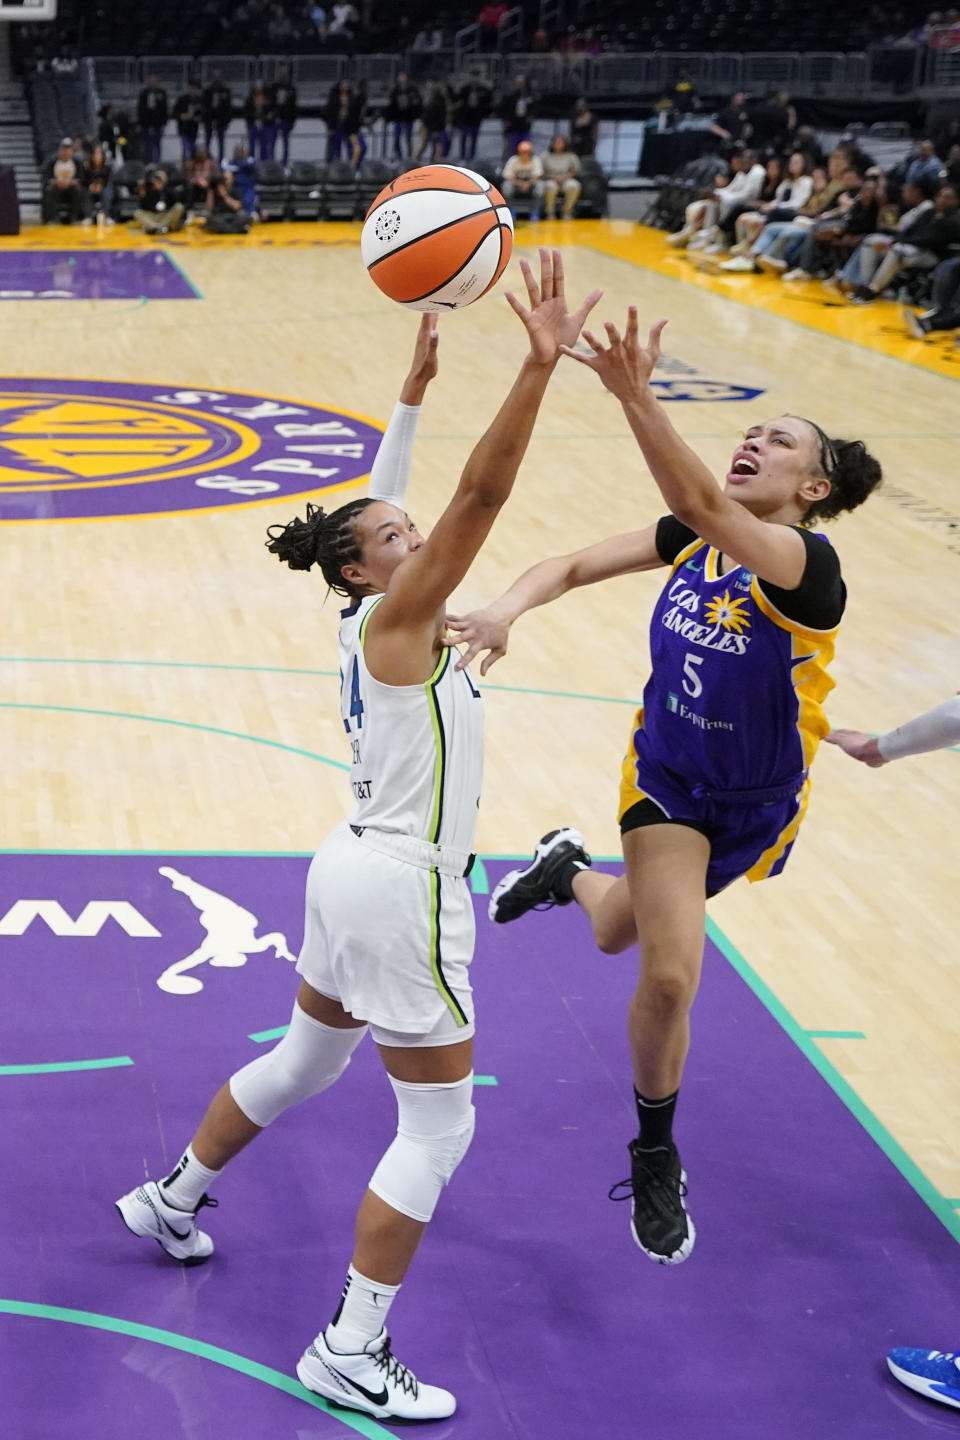 Los Angeles Sparks forward Dearica Hamby, right, shoots as Minnesota Lynx forward Napheesa Collier defends during the first half of a WNBA basketball game Tuesday, June 20, 2023, in Los Angeles. (AP Photo/Mark J. Terrill)